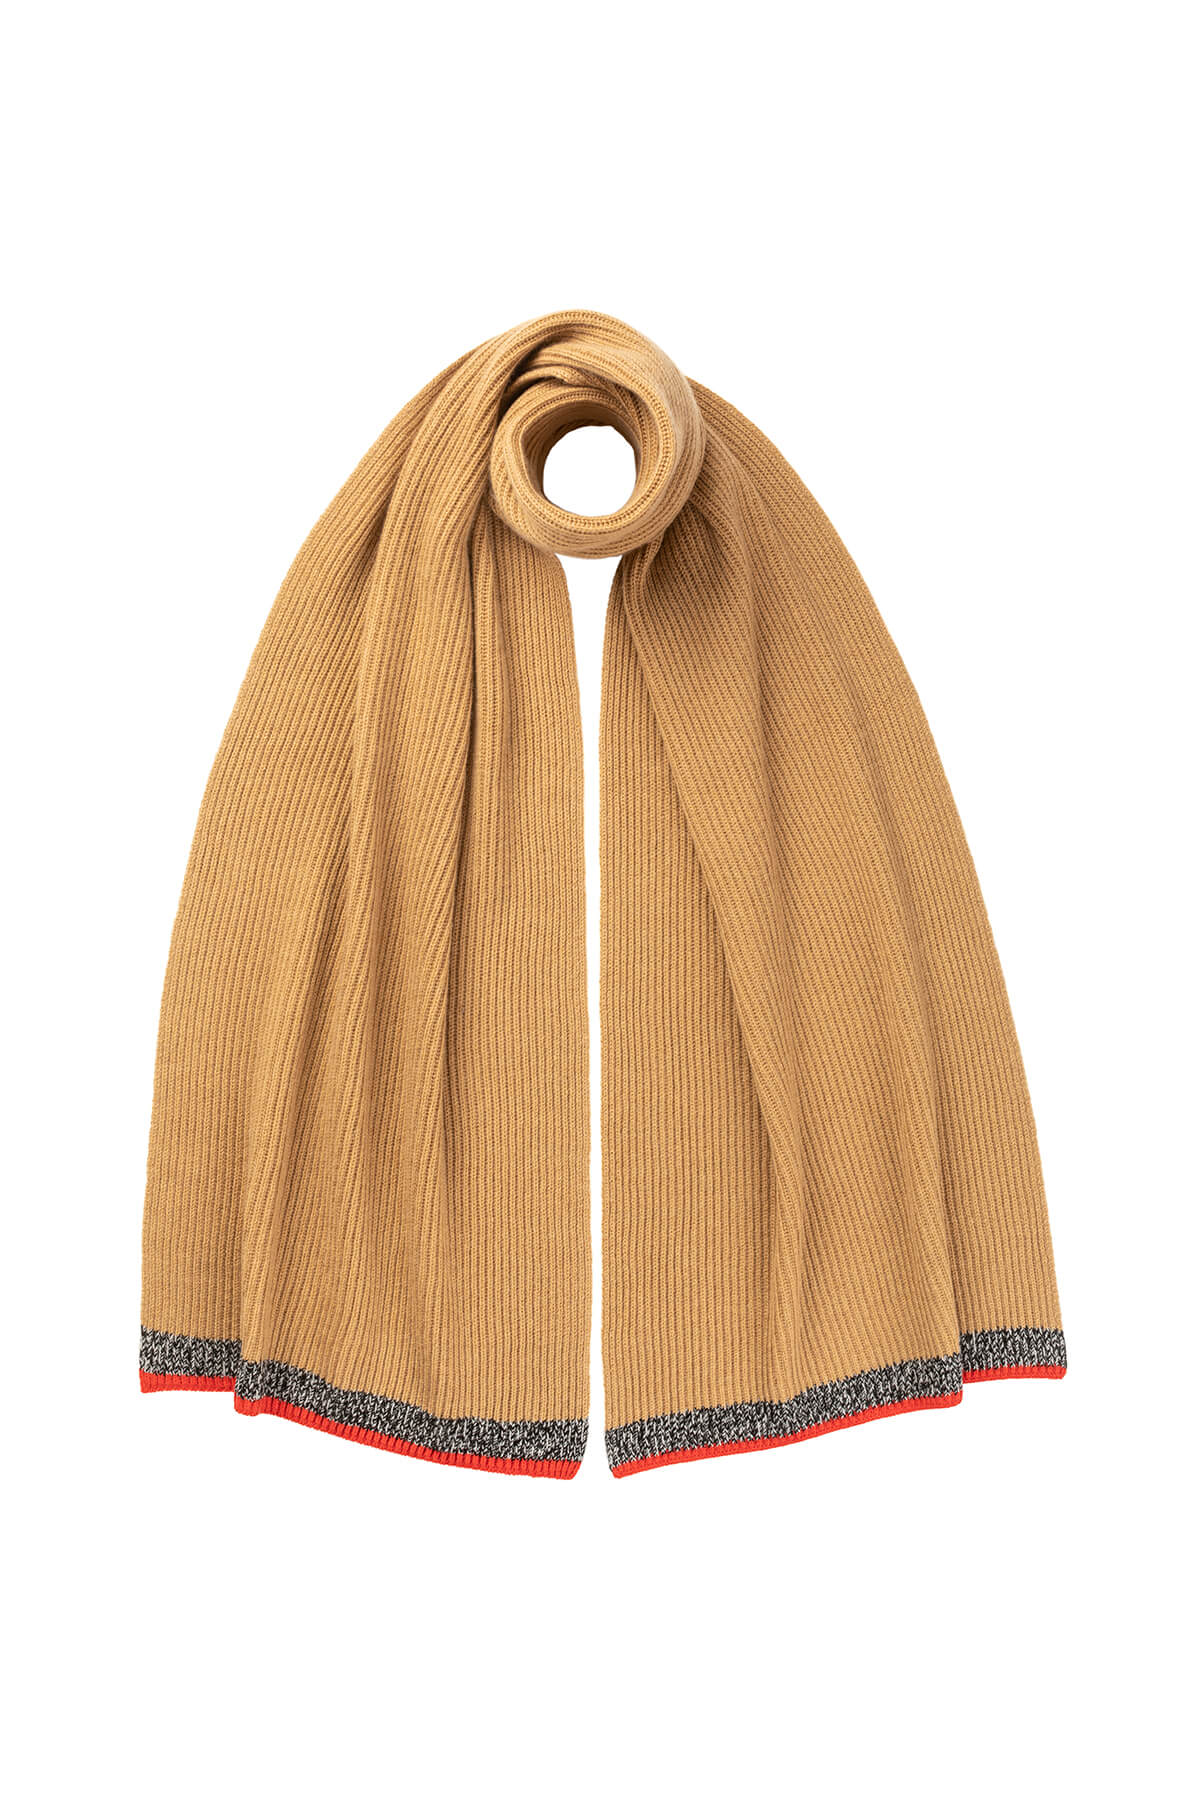 Johnstons of Elgin’s Camel Ribbed Cashmere Tipping Scarf on a white background HAA03306Q23683